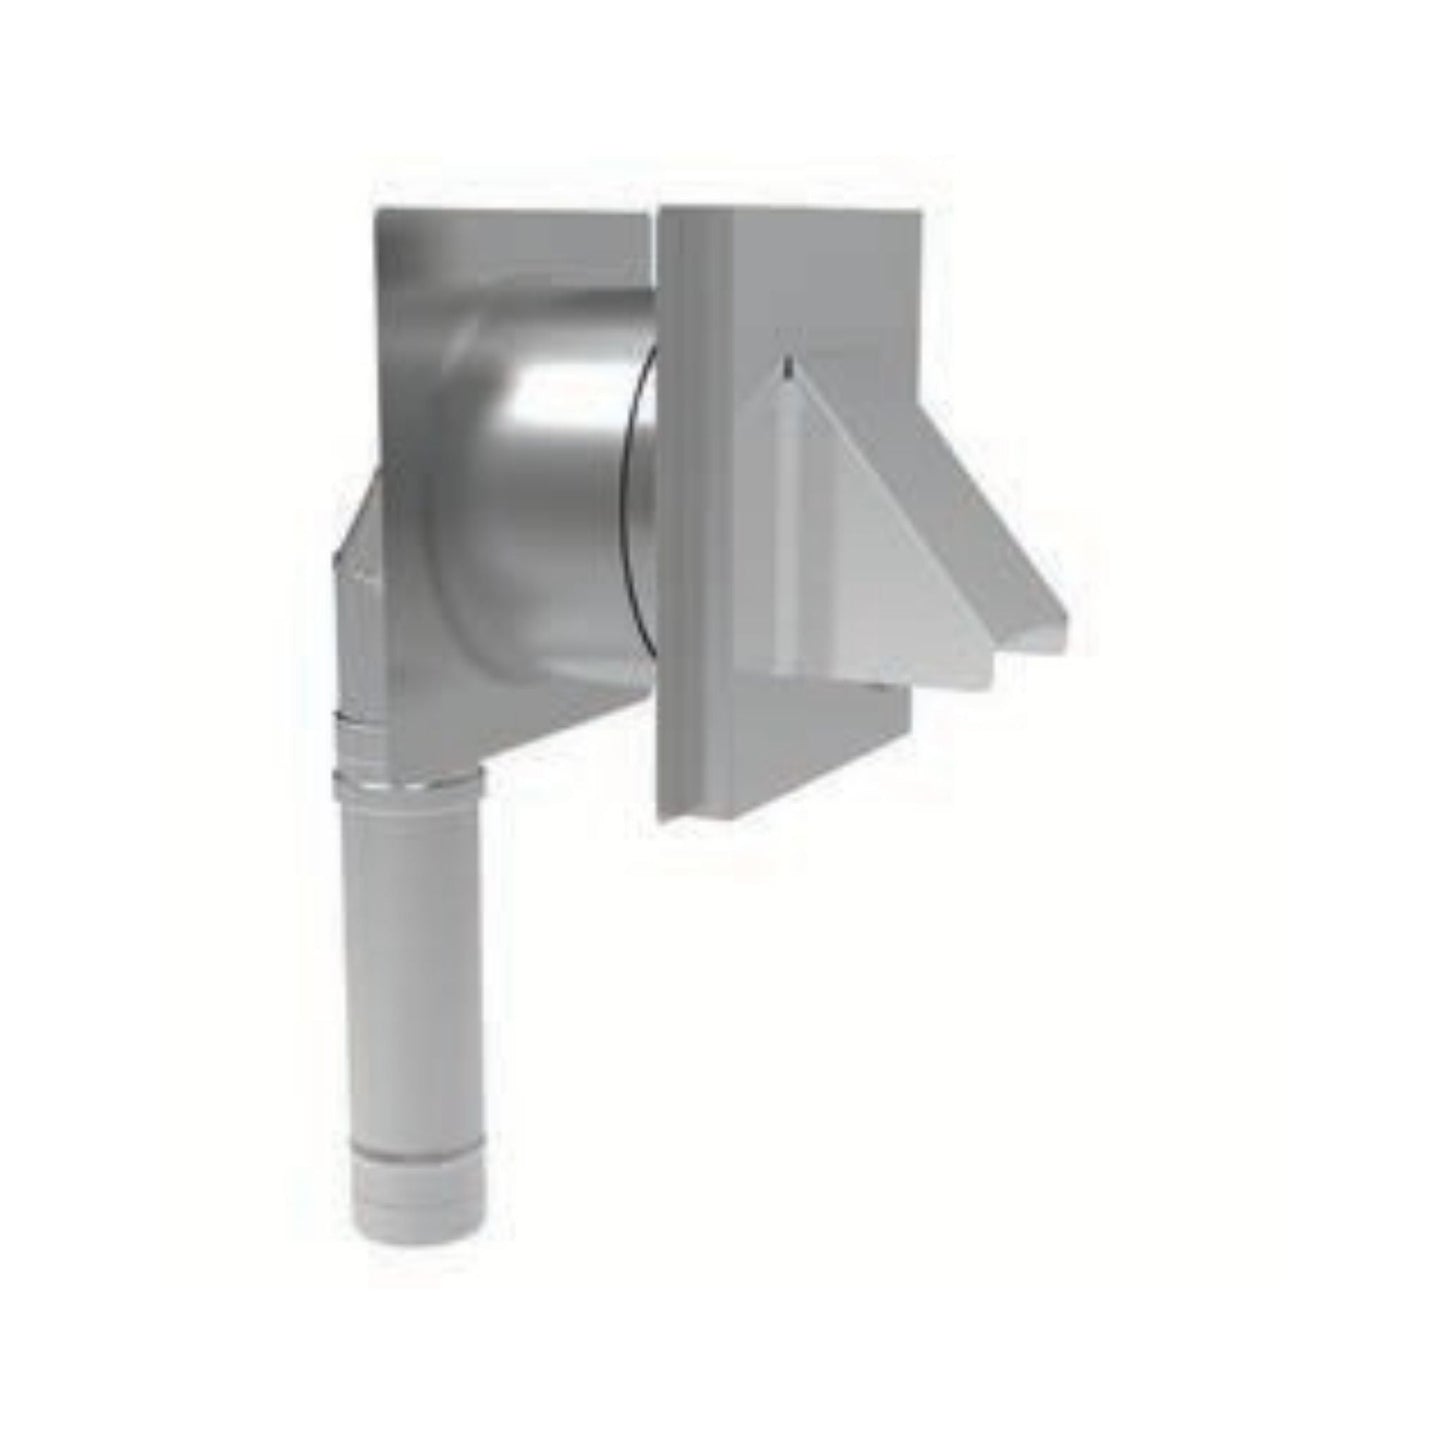 DuraVent FasNSeal 3" Standard Wall Mount Insulated Kit